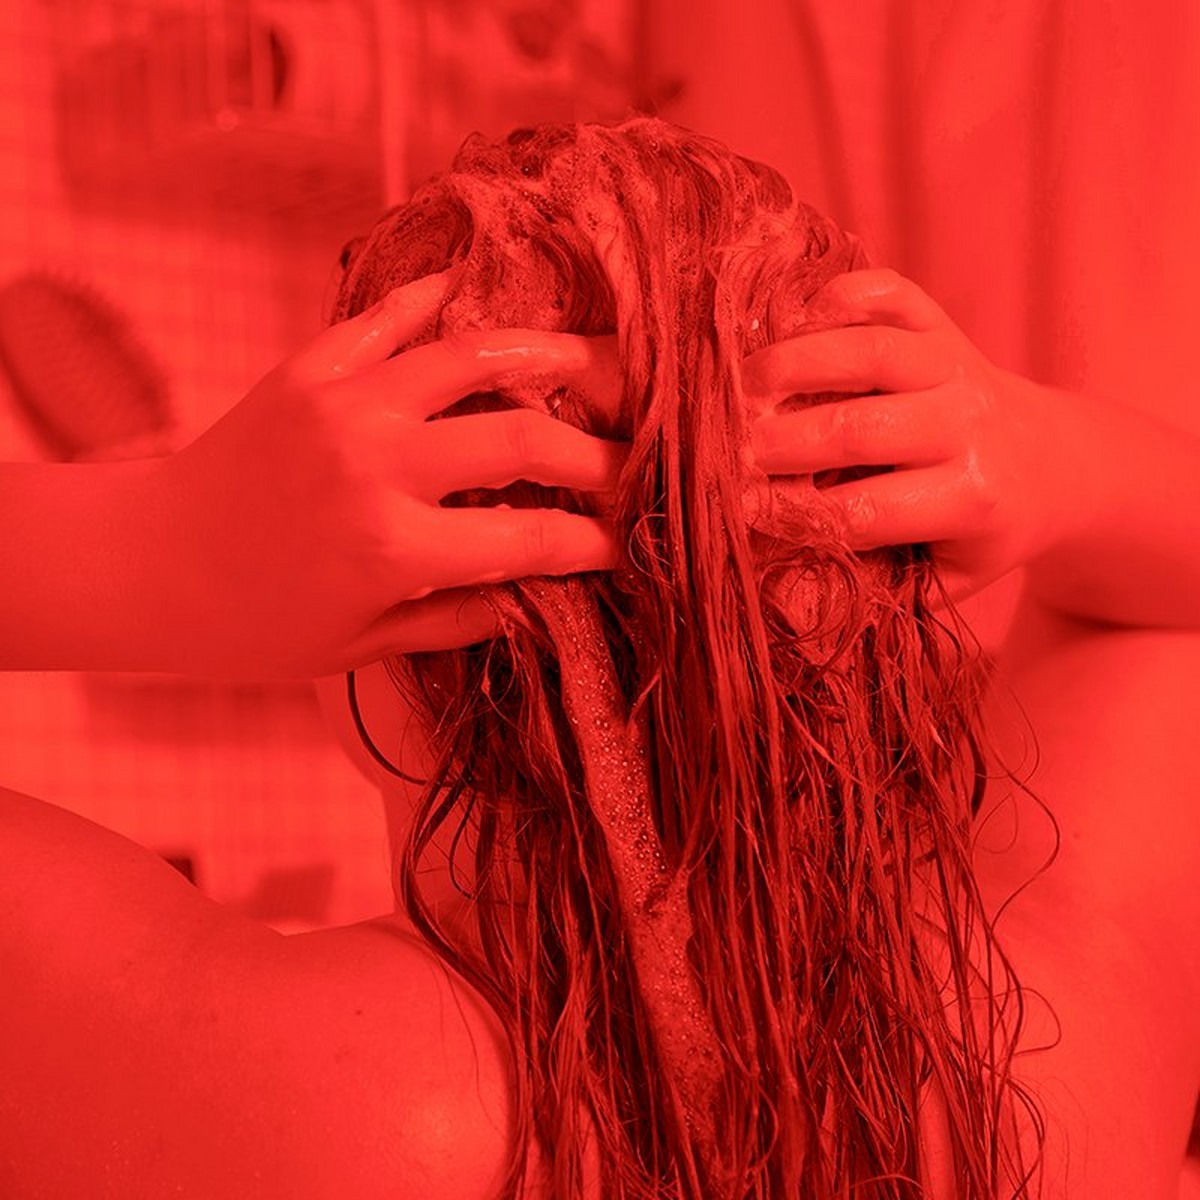 Woman shampooing her hair with a red filter on the image